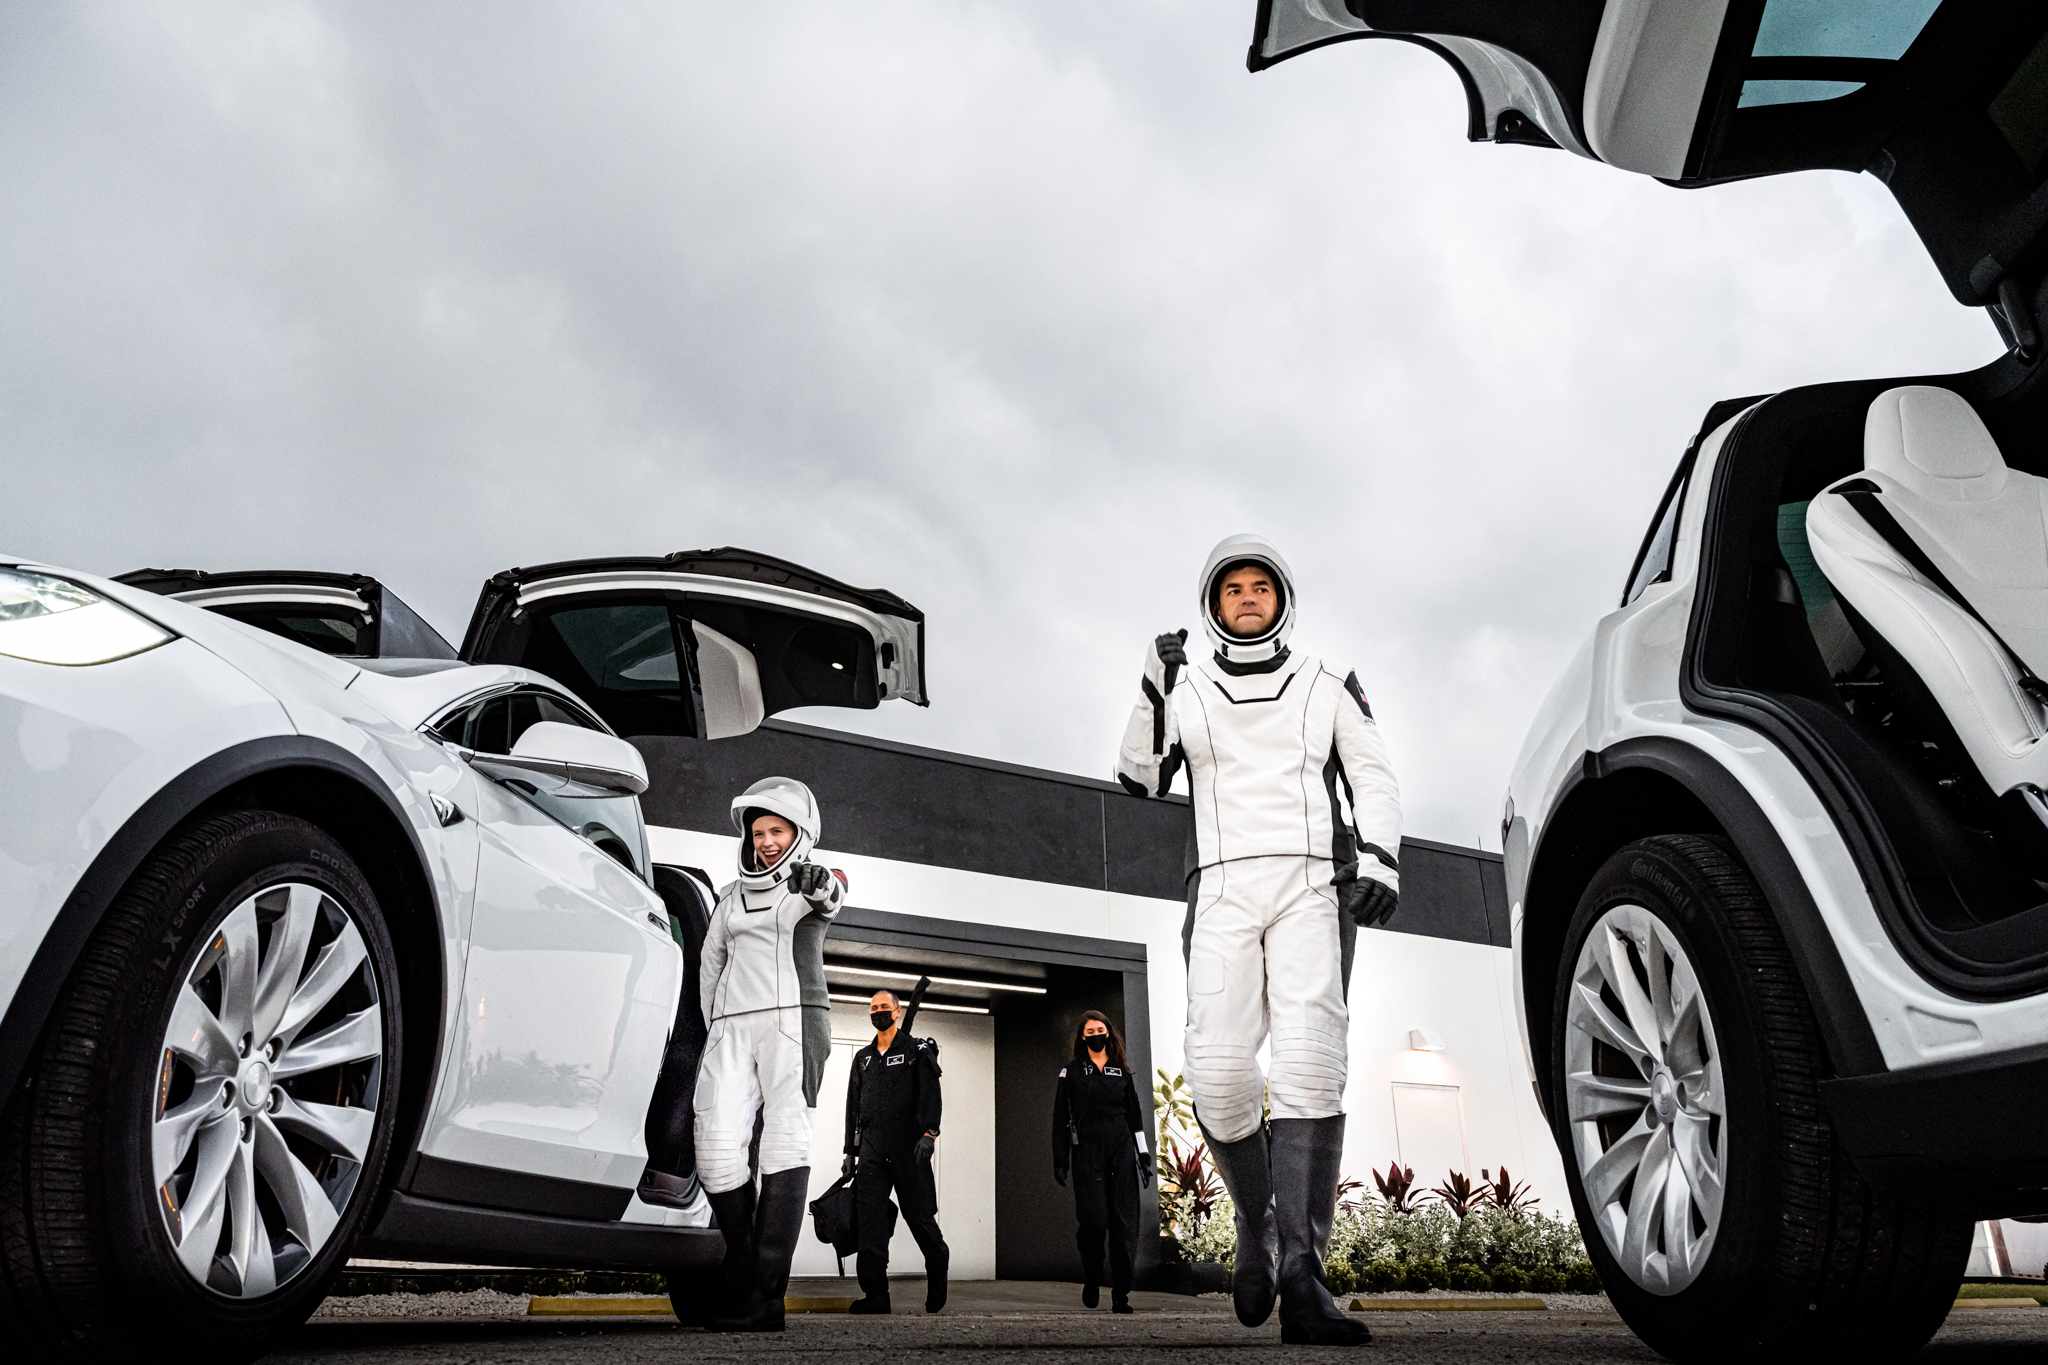 People in astronaut suits exit cars with gull-wing doors.